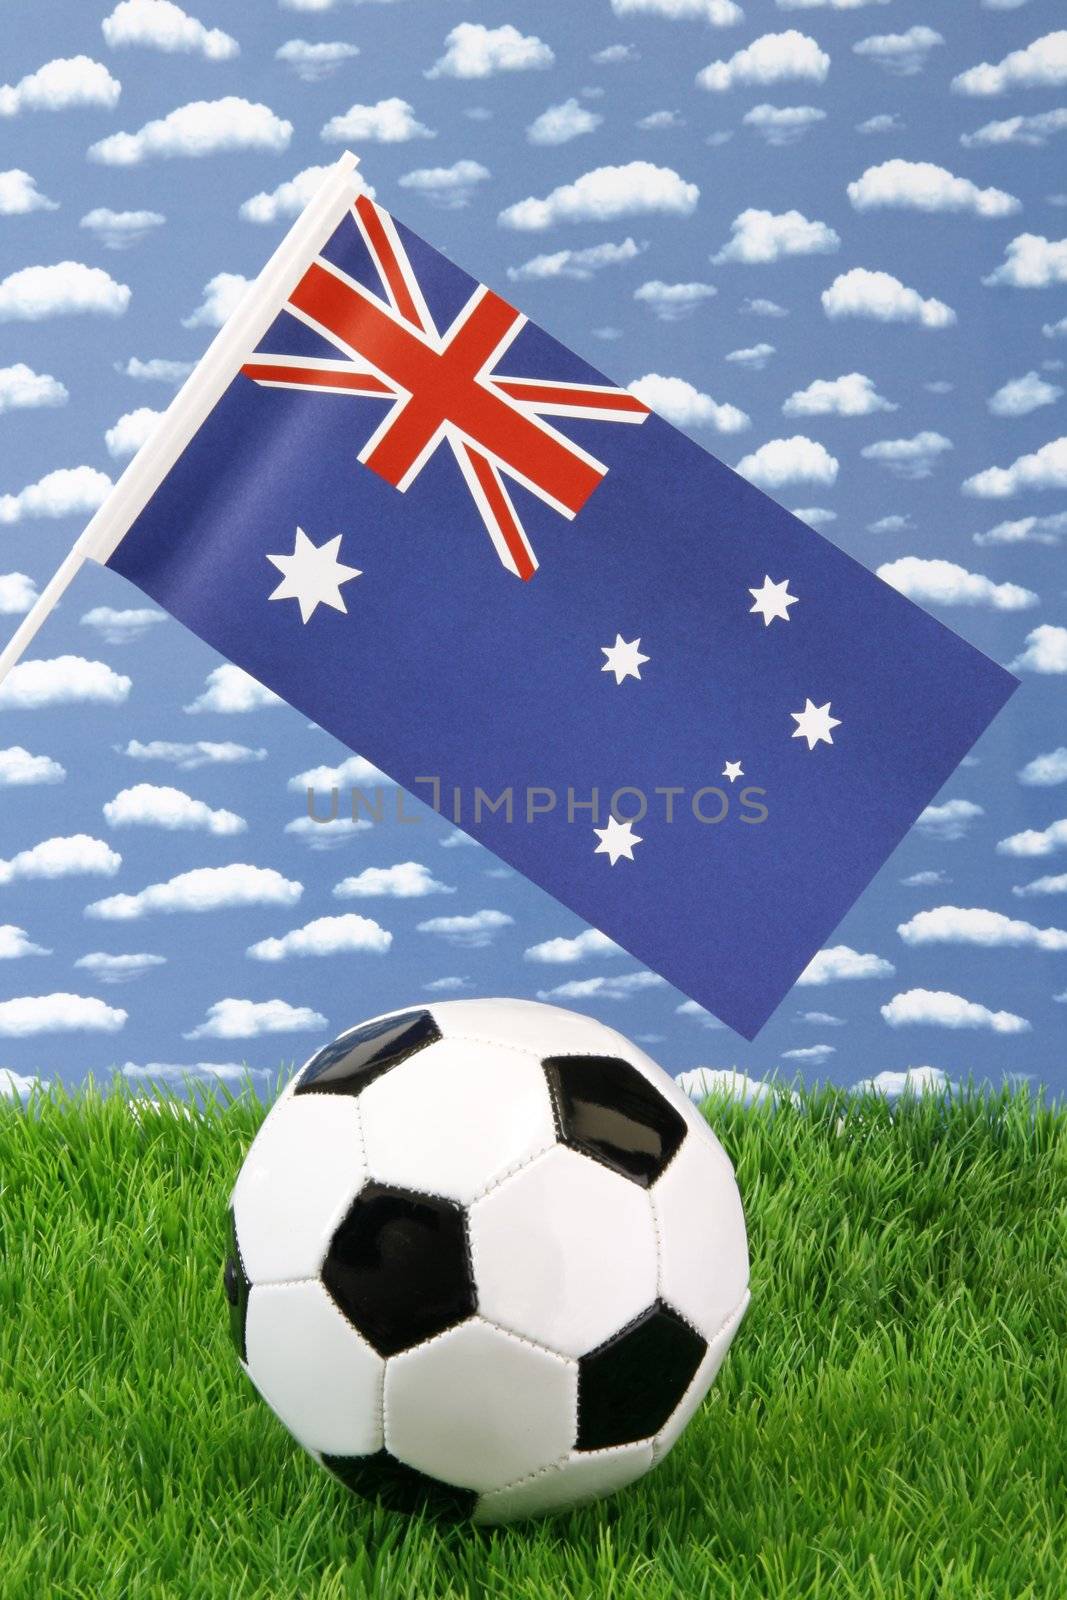 Soccerball on grass with australian national flag over sky background